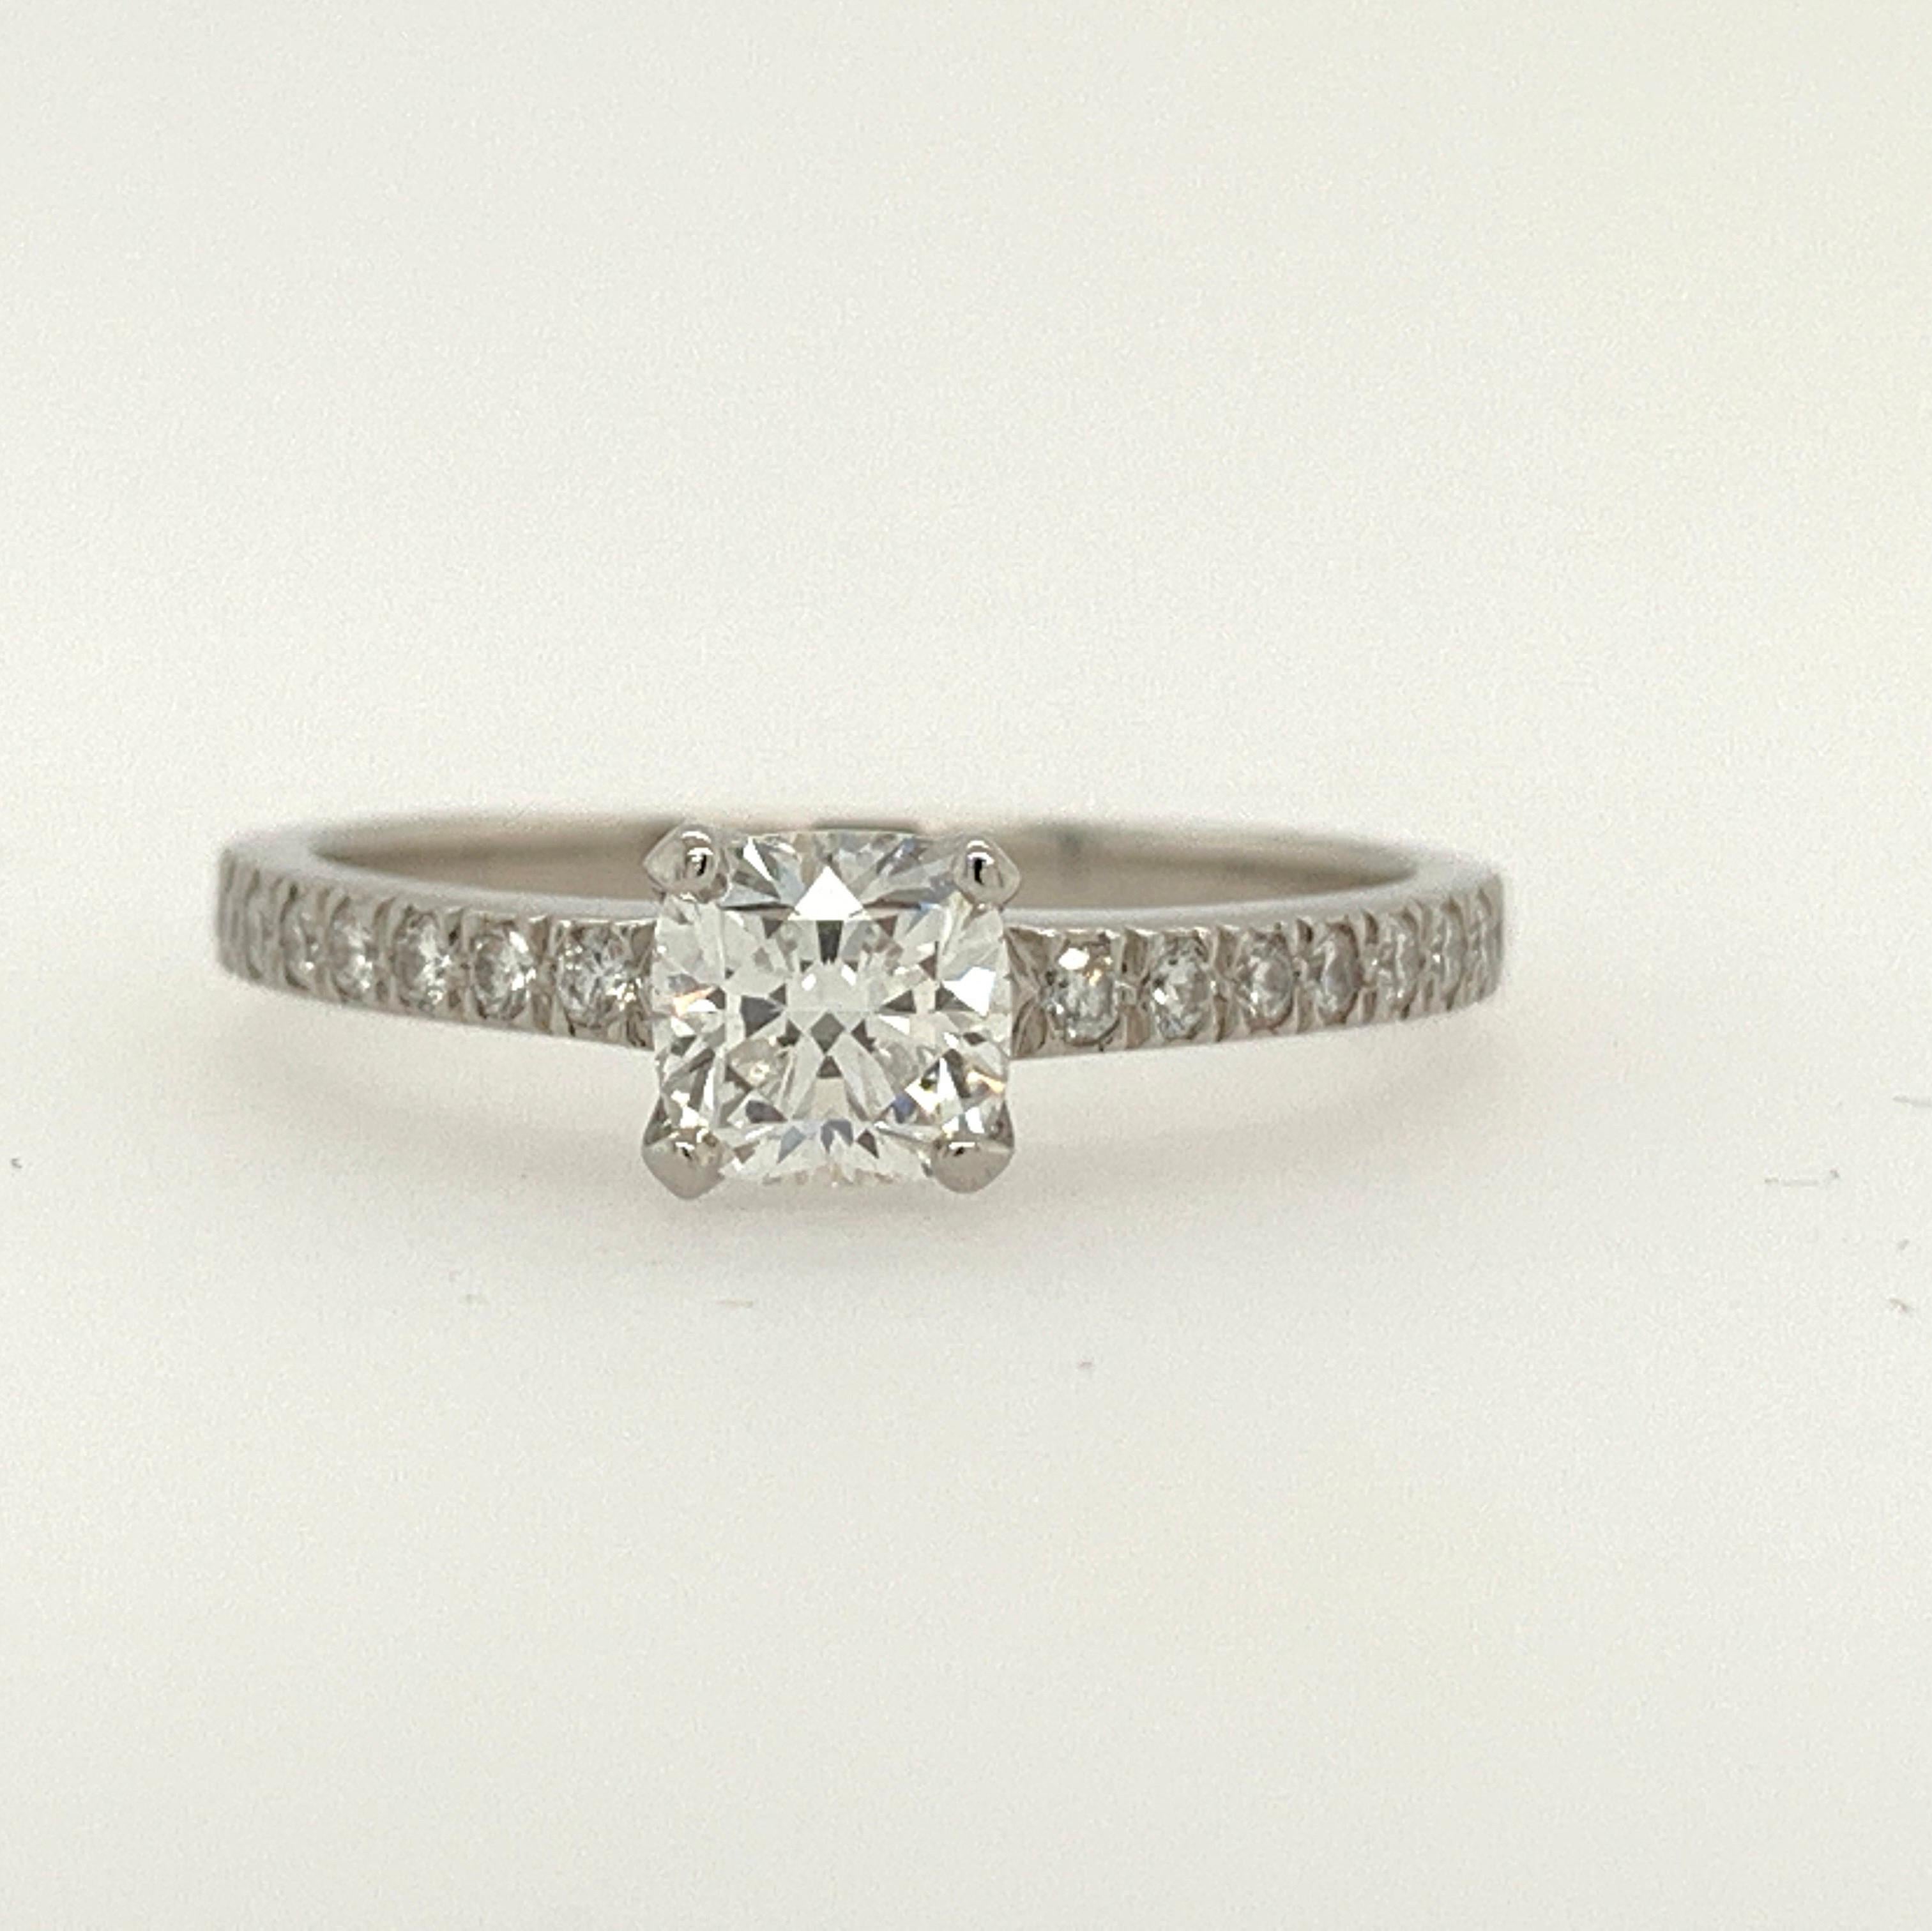 Platinum ring (size 6.75) set with 0.16 carats of colorless rounds and a 0.59ct, F color, Internally Flawless center Cushion. Original paperwork is included. 